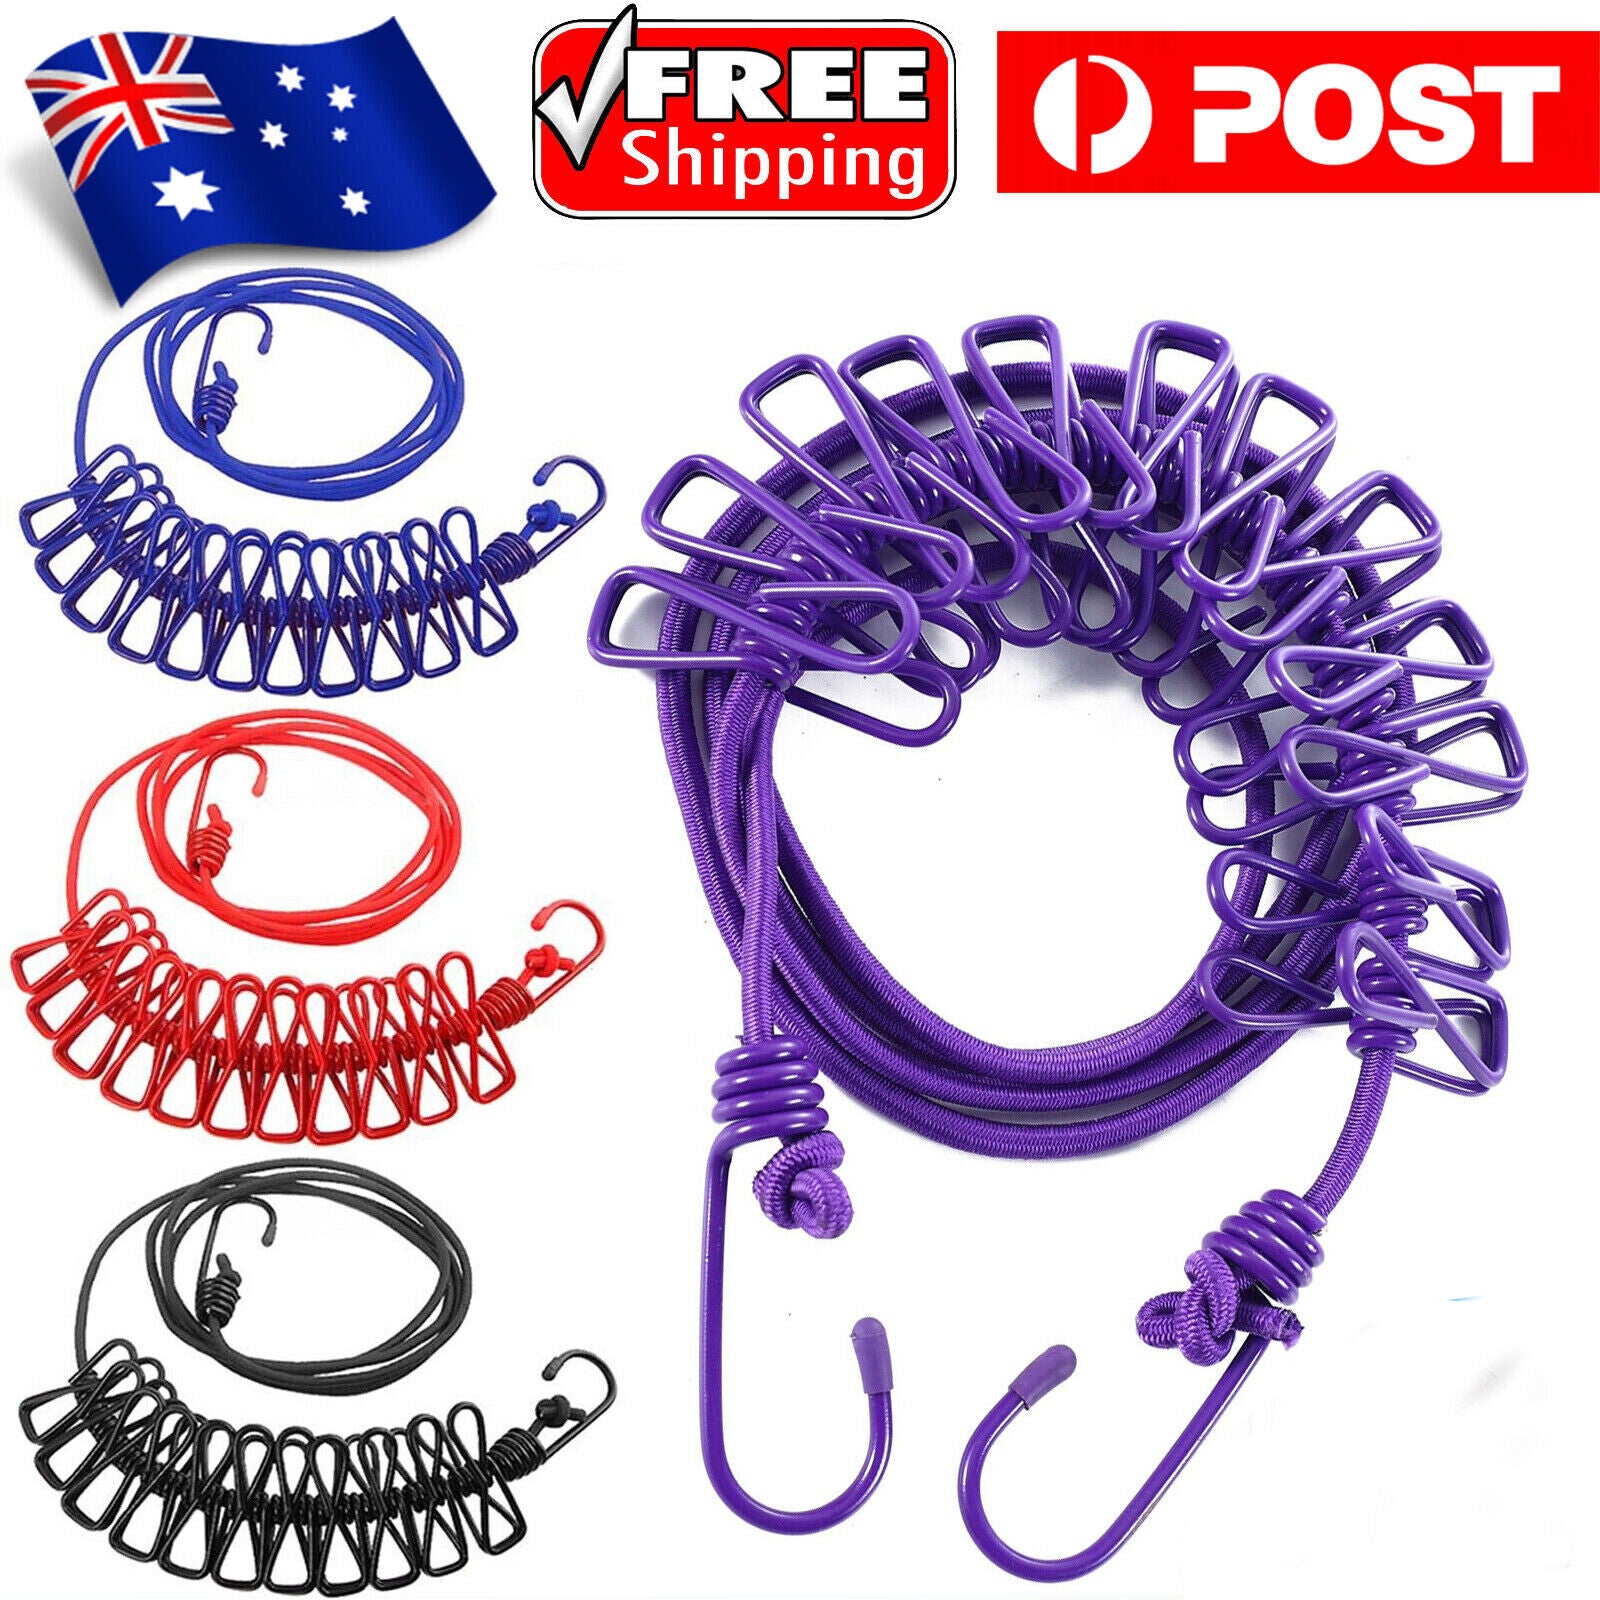 Portable Travel Camping Clothesline Washing Clothes Line Rope w/ 12 Clips Peg AU